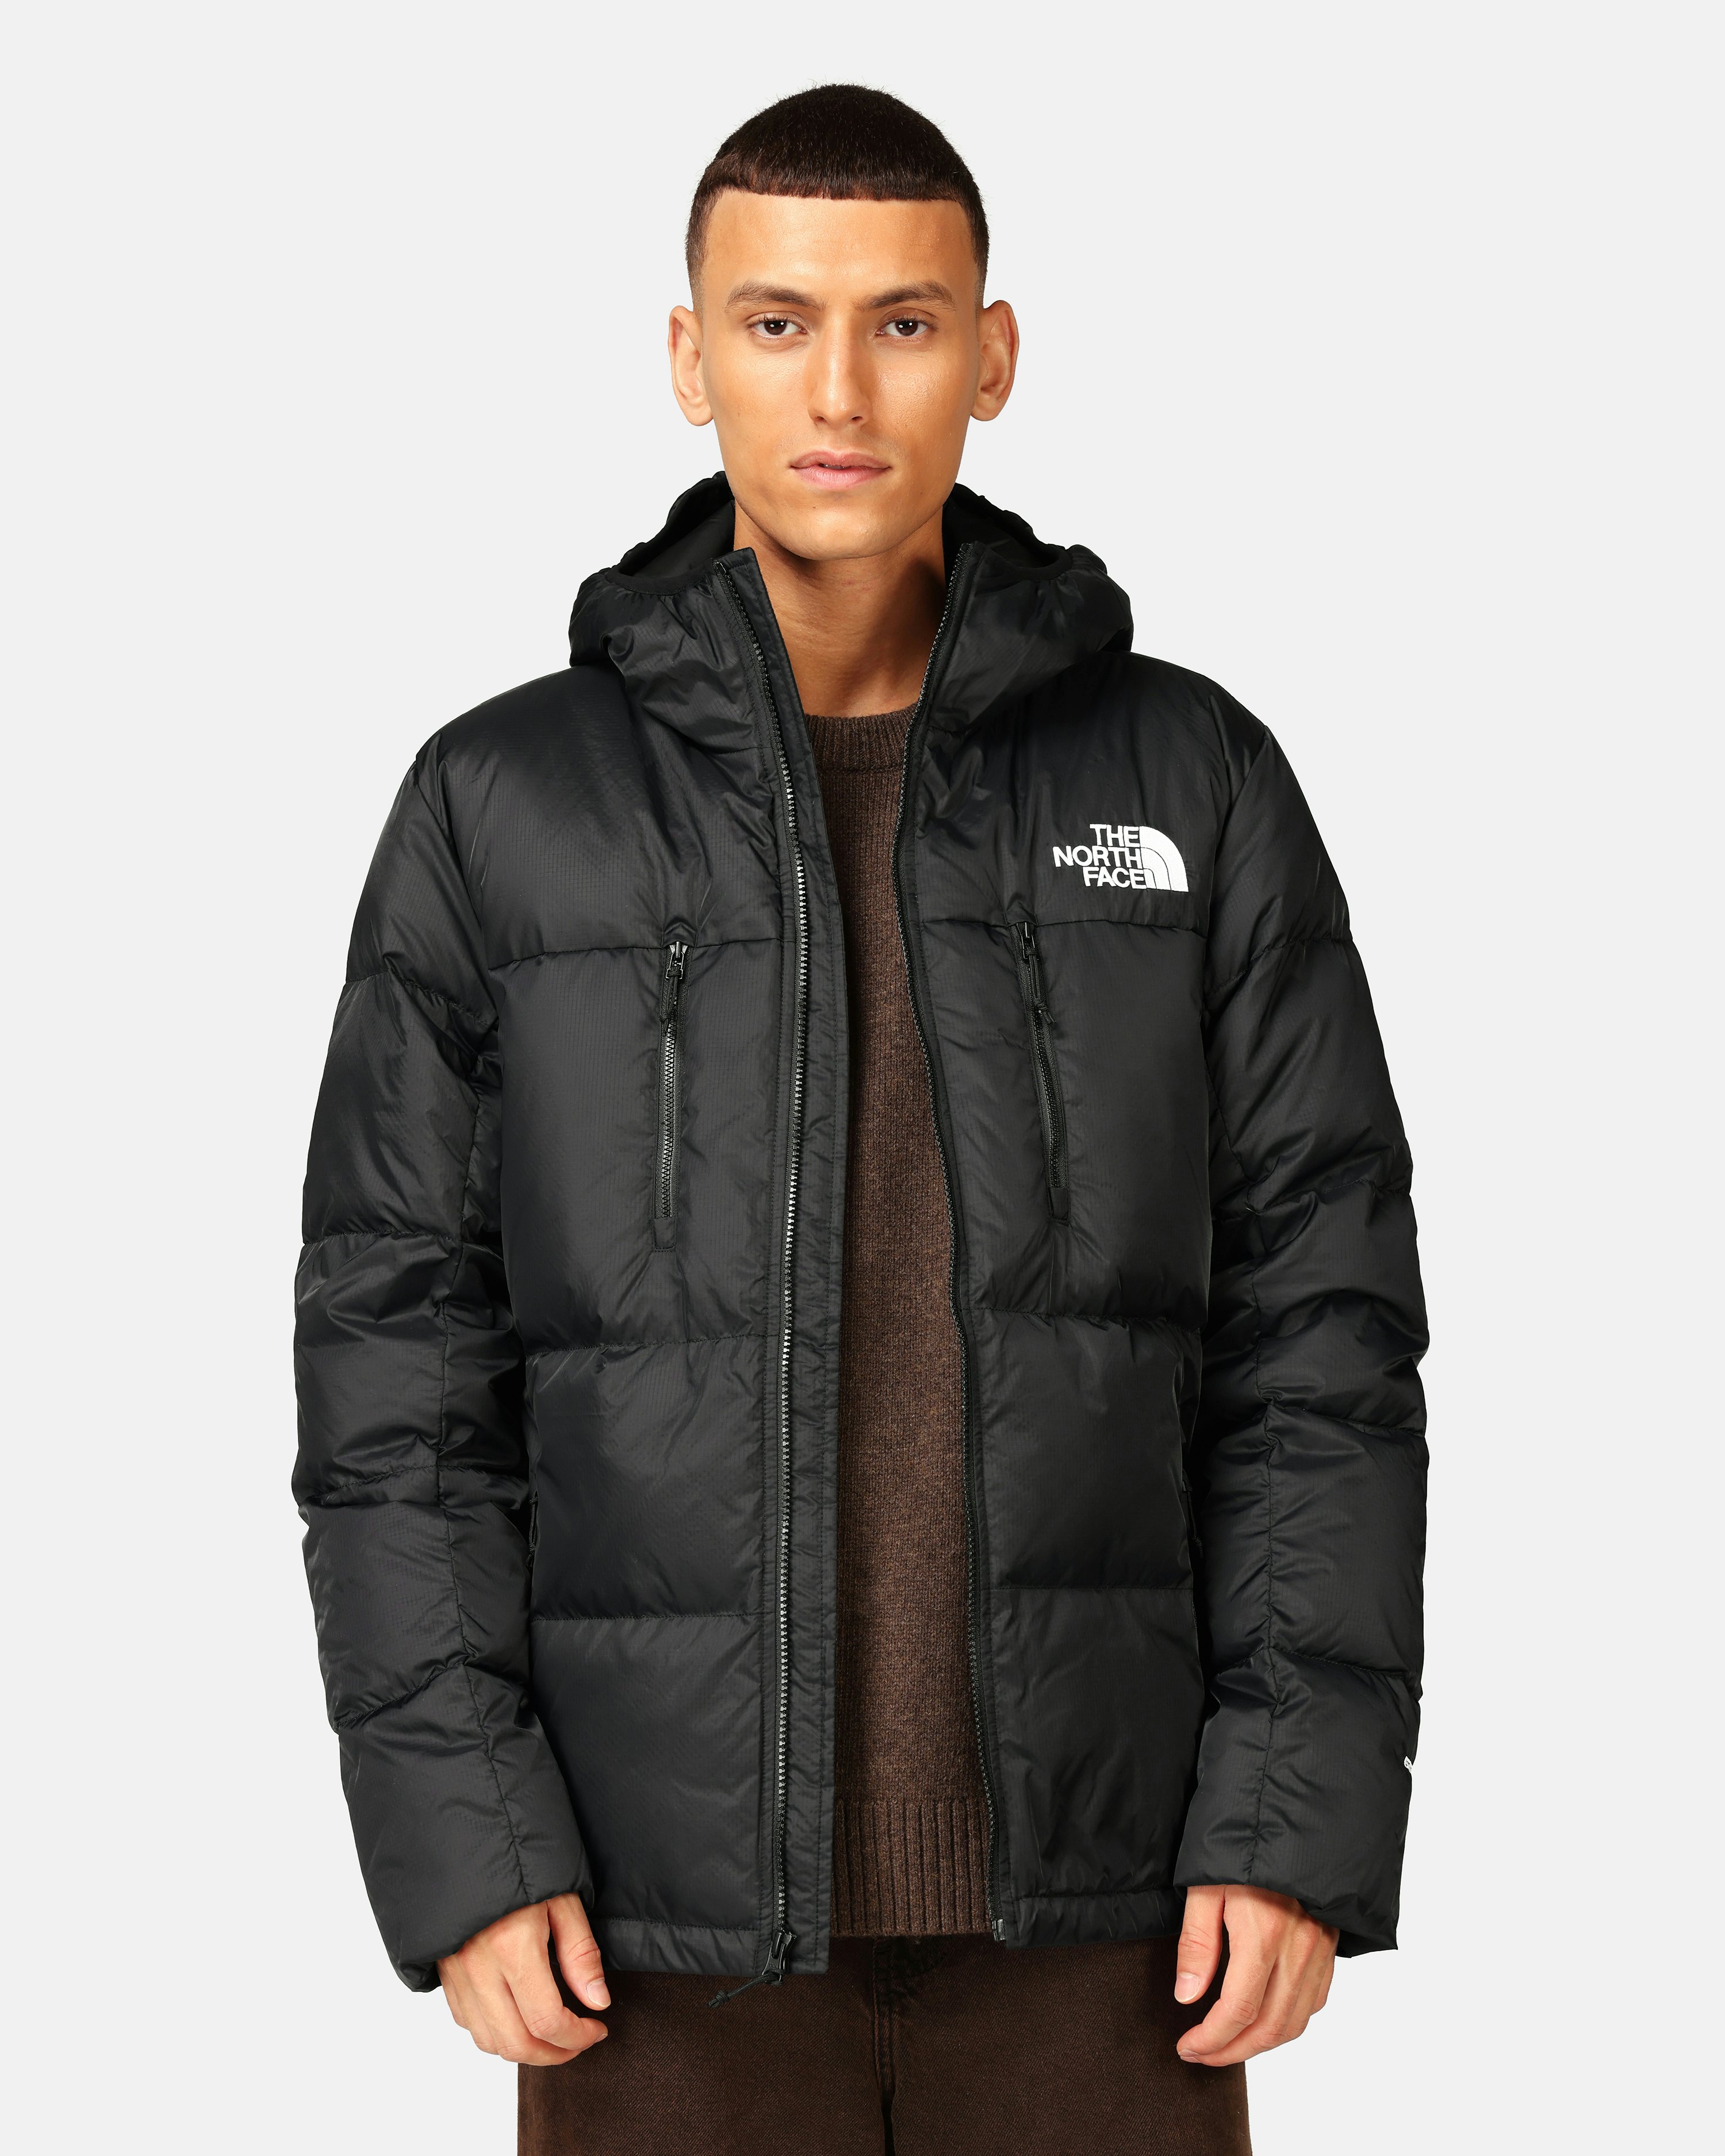 THENO[新品]THE NORTH FACE M'S LIGHT DOWN JACKET